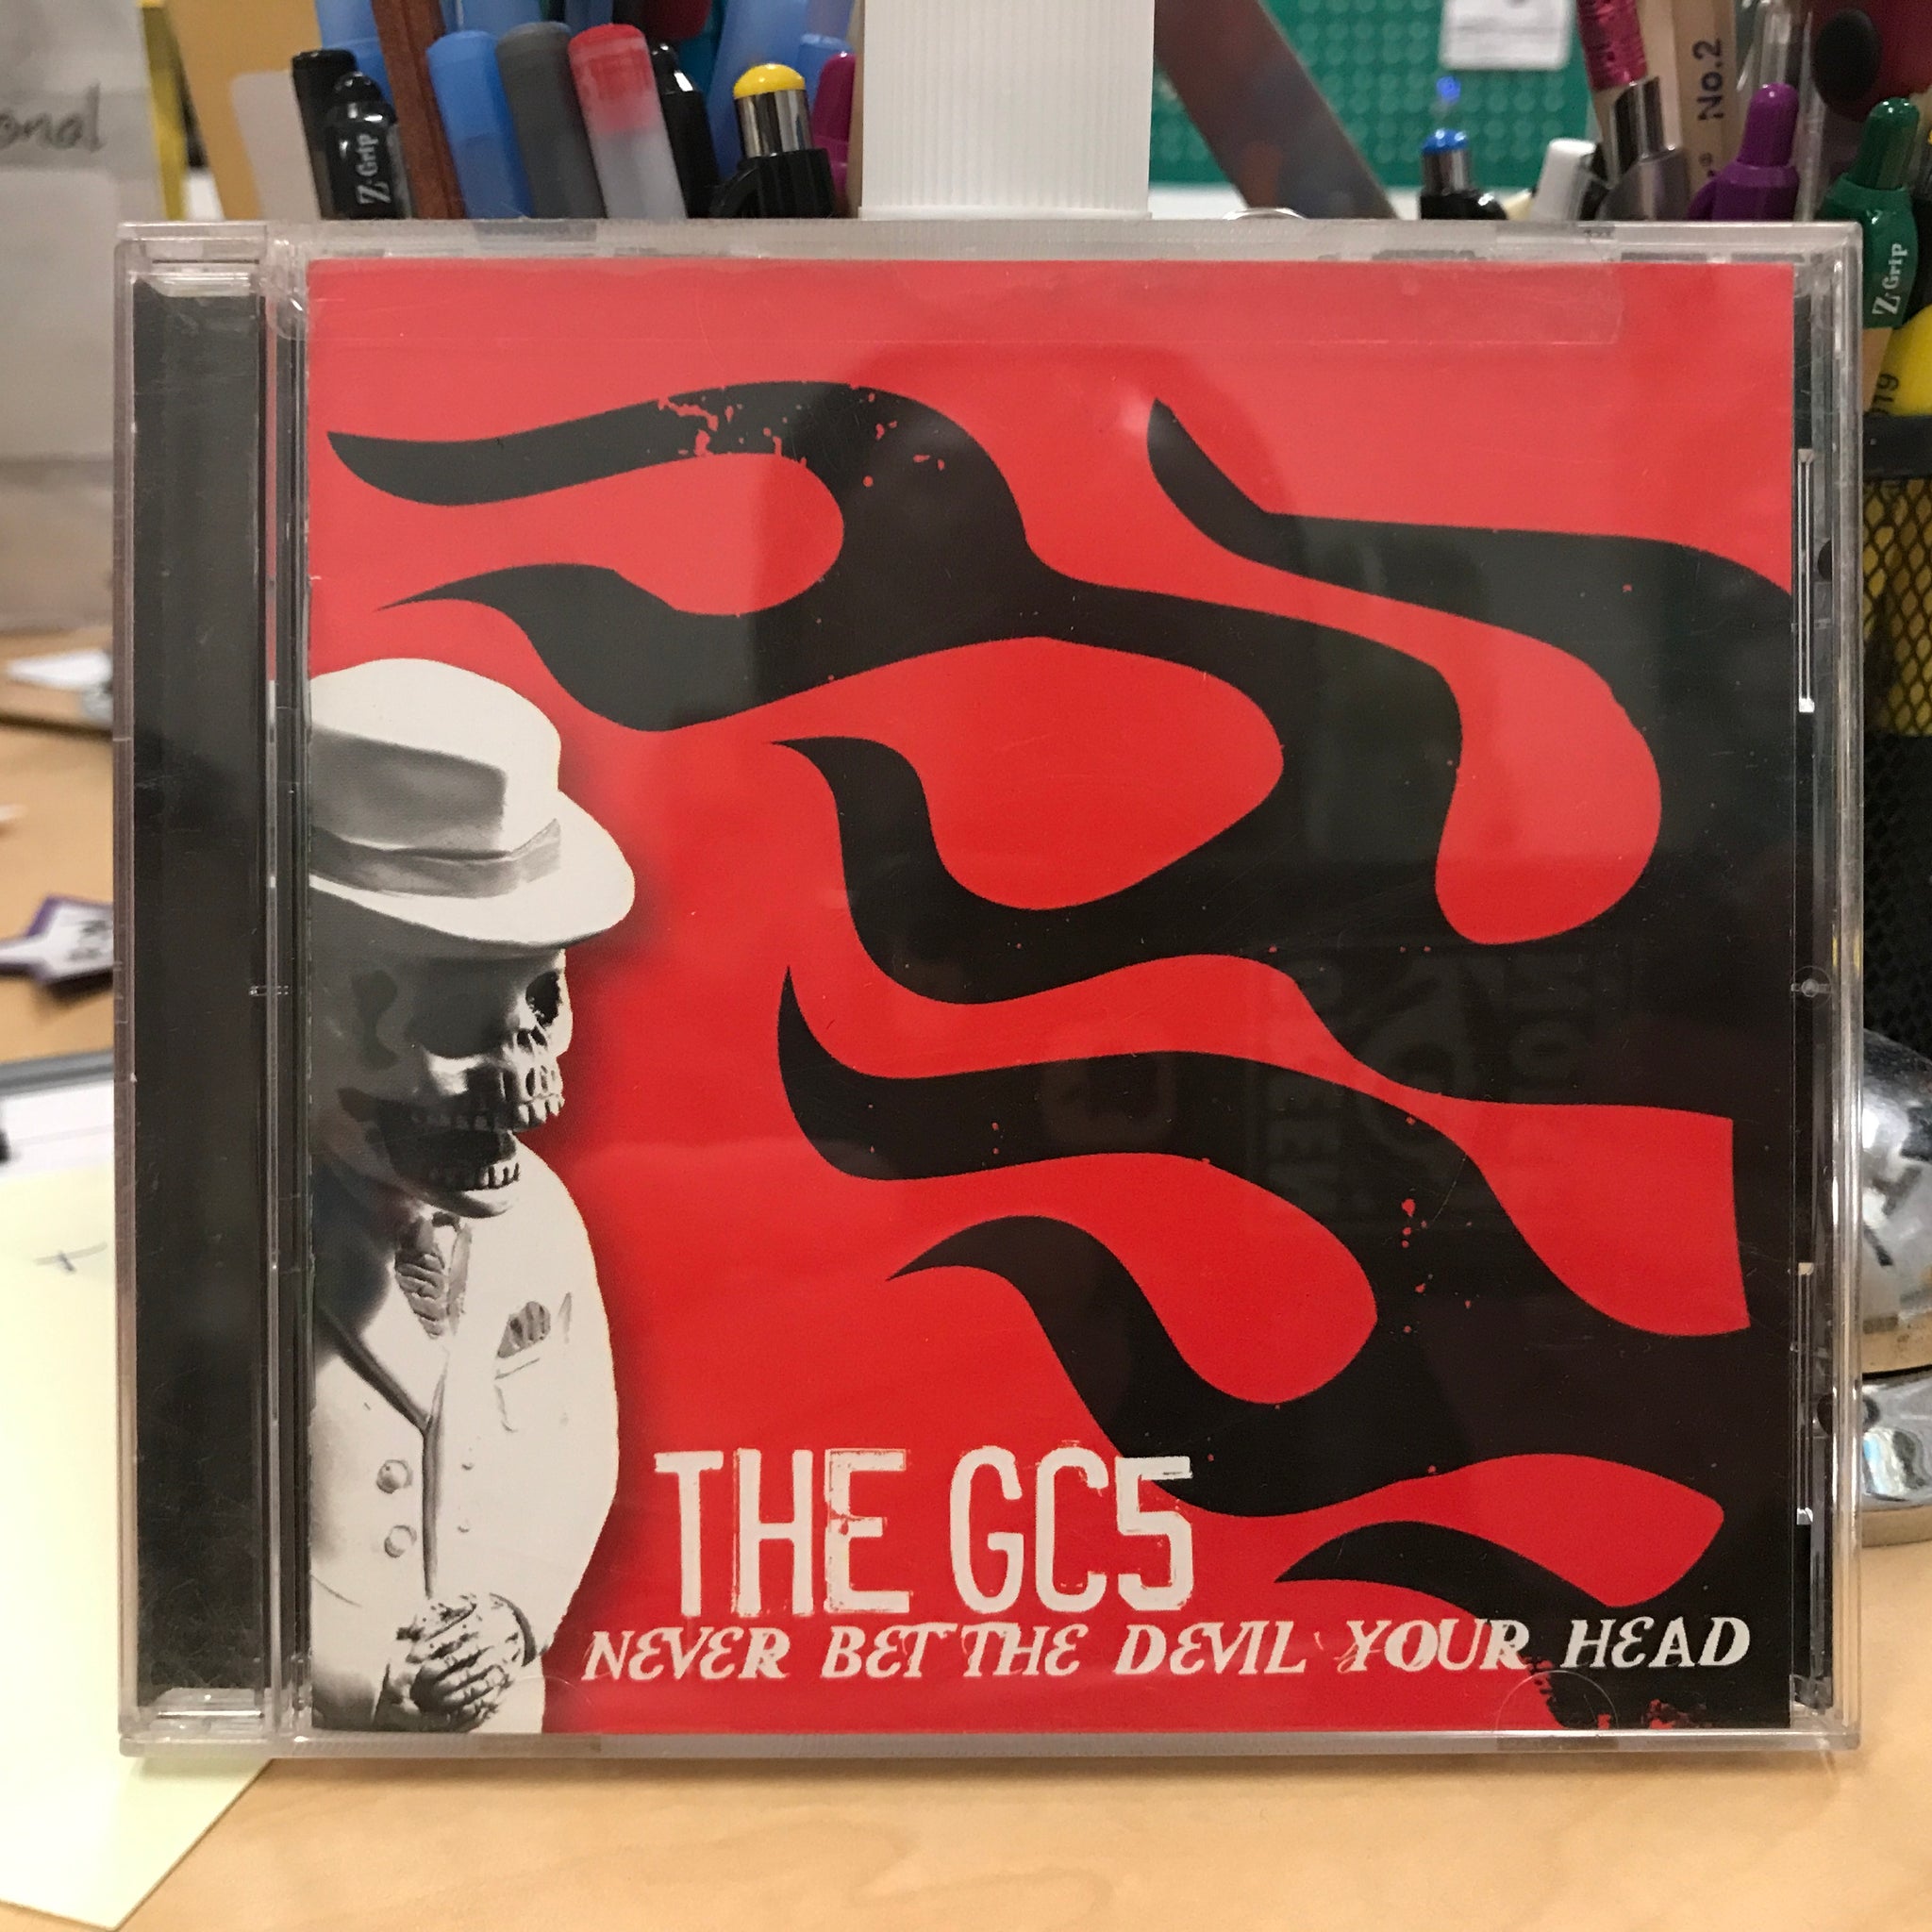 GC5, The - Never Bet the Devil Your Head - Used CD